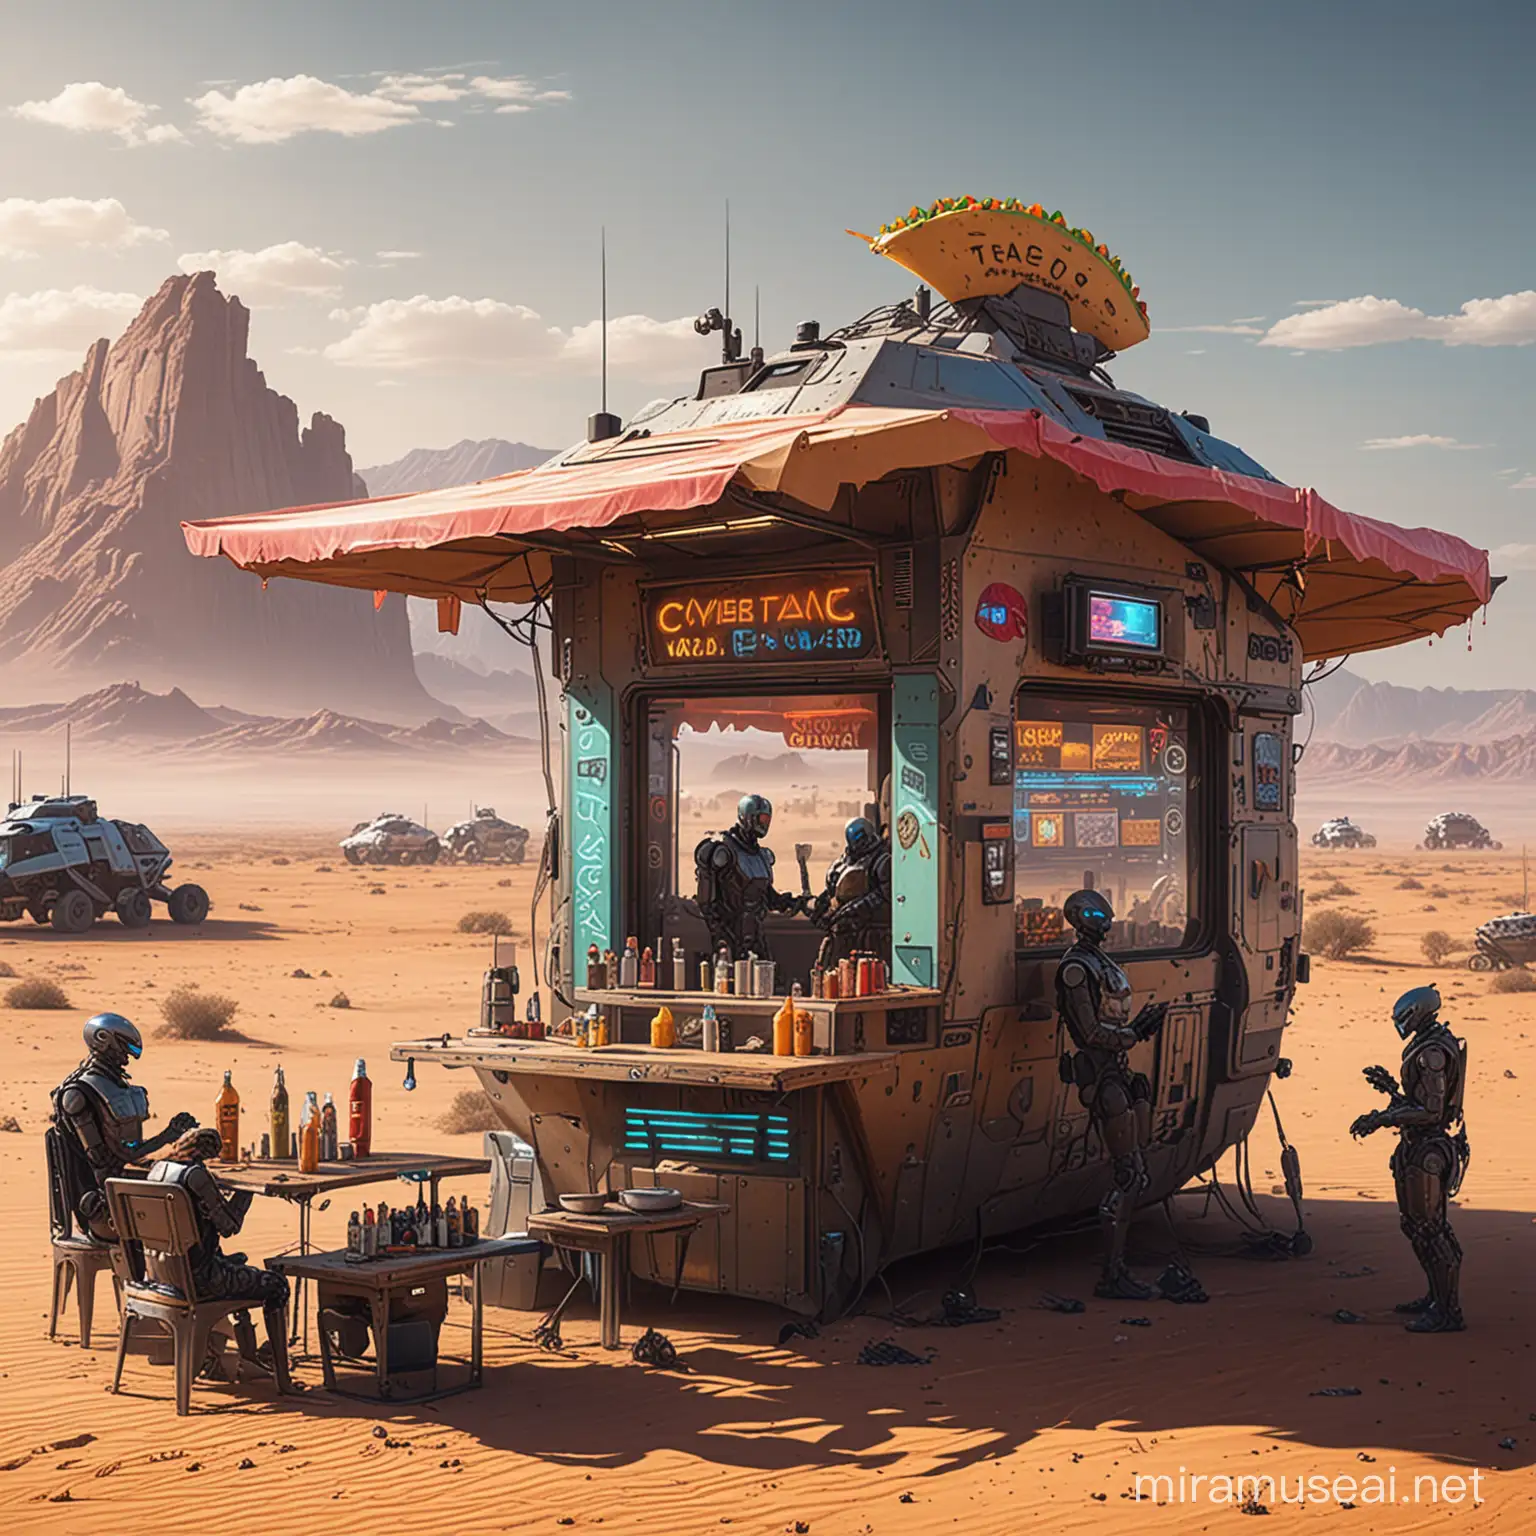 Cyberpunk Taco Stand in a Dystopian Desert with Socializing Robots and Cyborgs